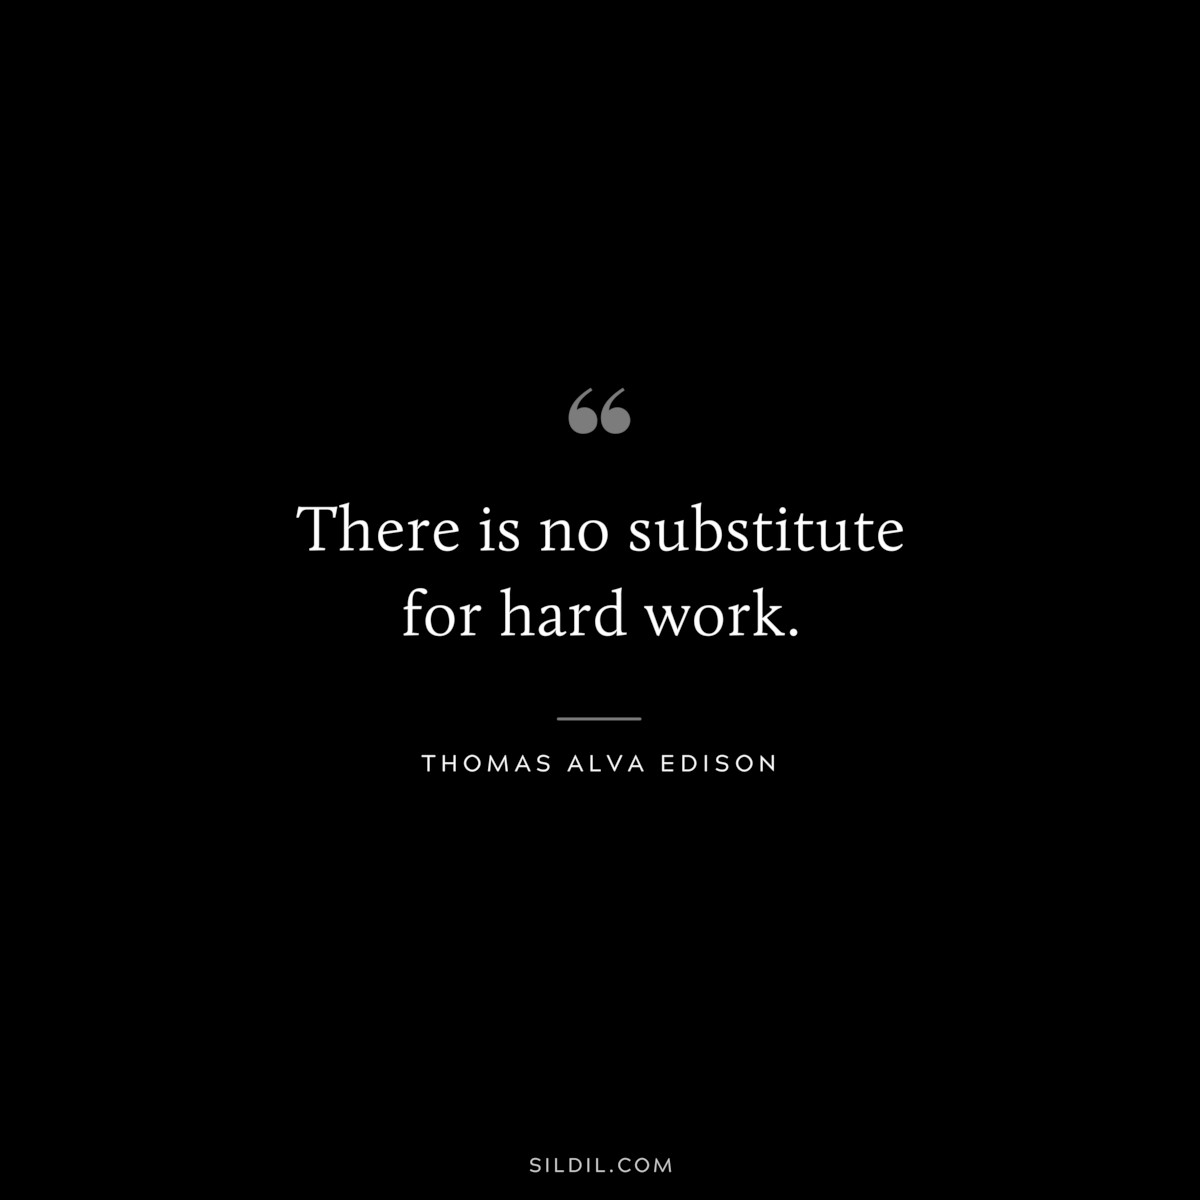 There is no substitute for hard work. ― Thomas Alva Edison